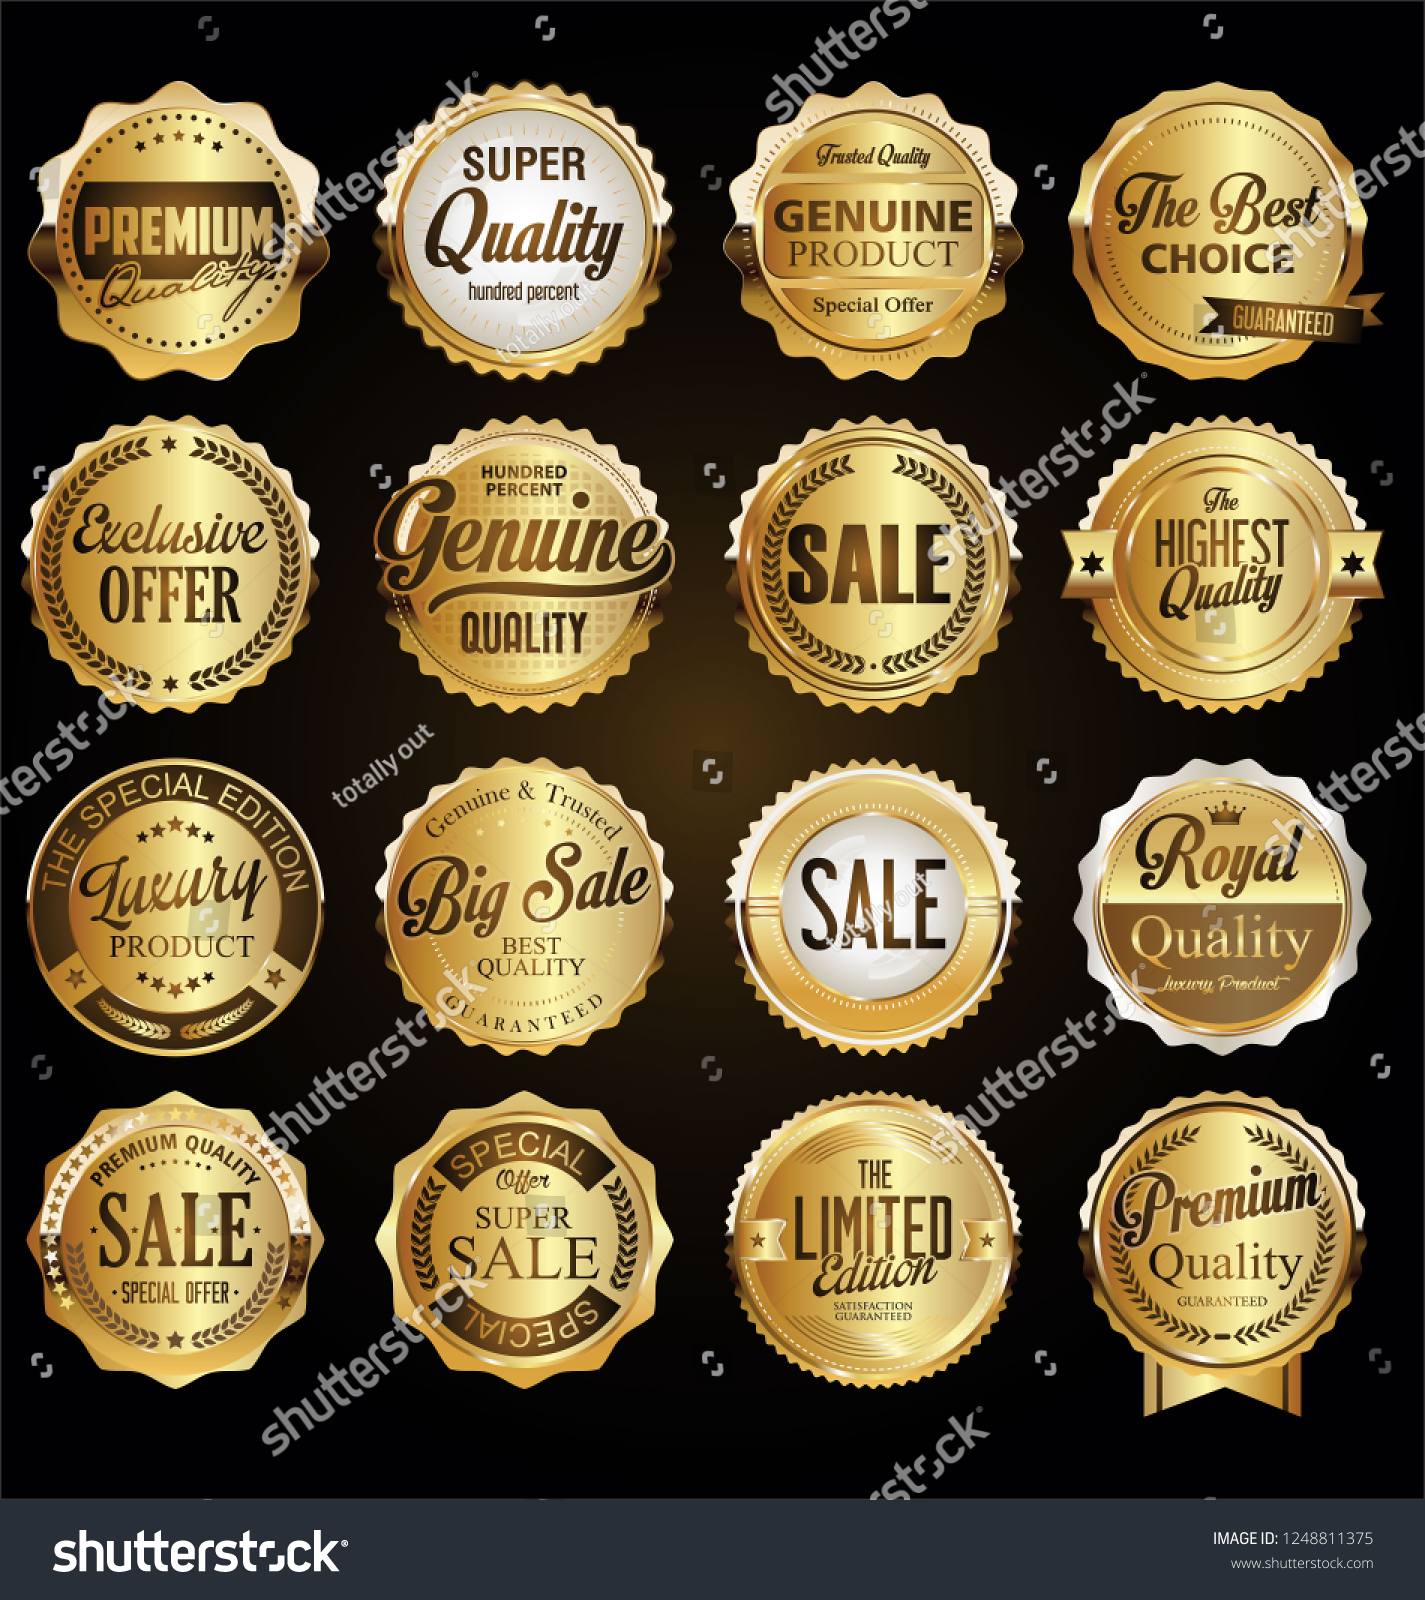 Collection of vintage retro premium quality badges and labels #1248811375